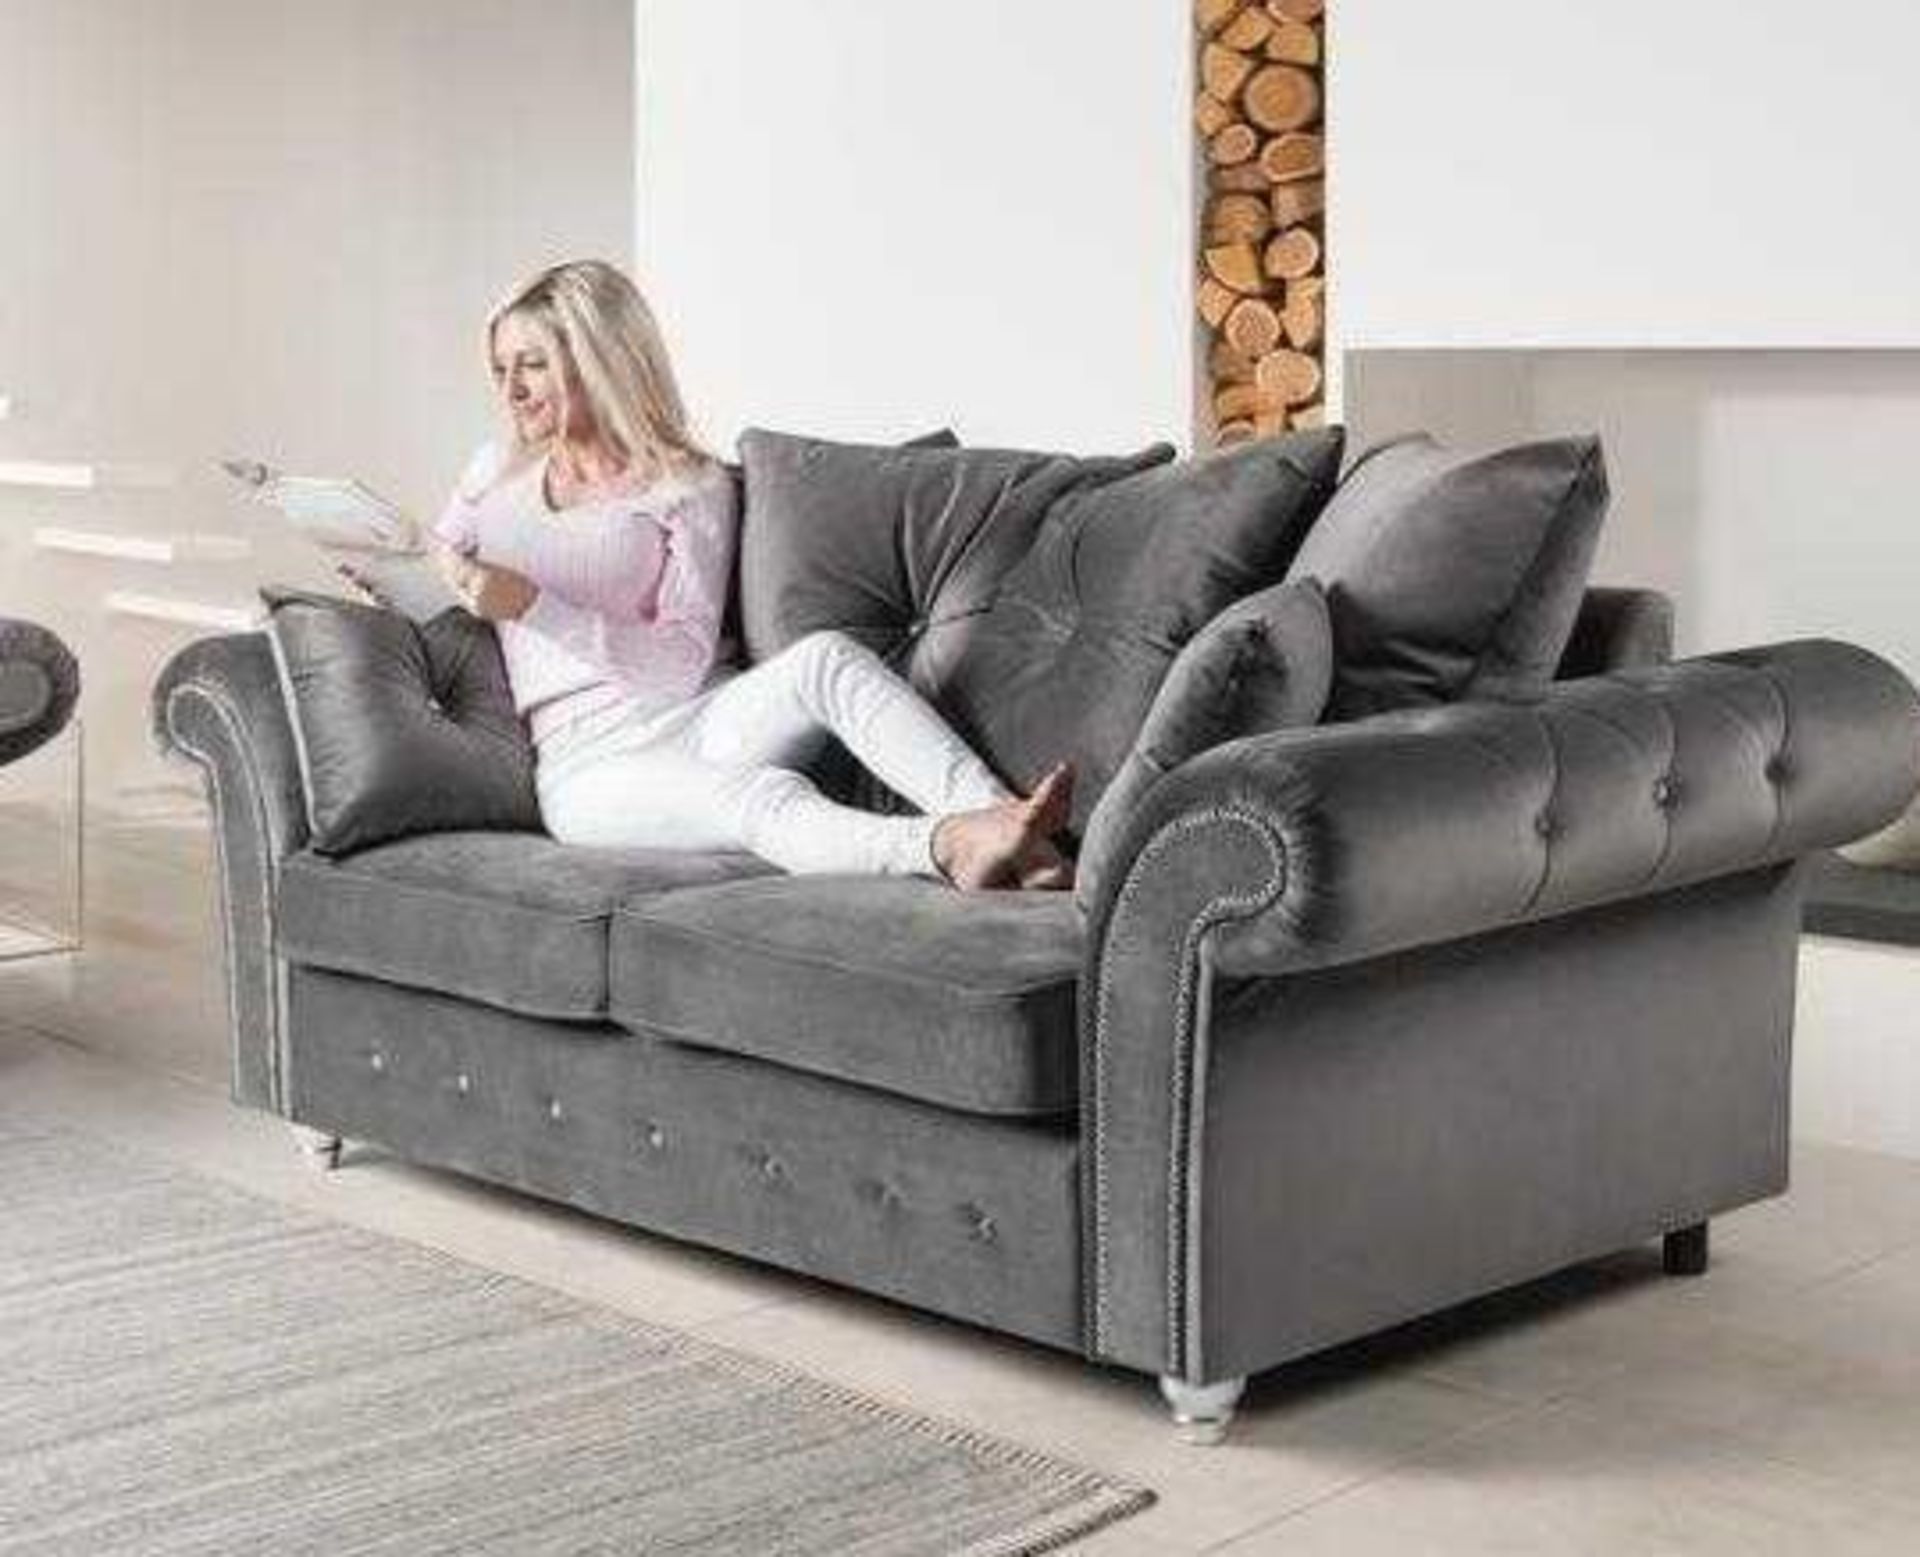 BRAND NEW Bedford 3 seater sofa.RRP: £949